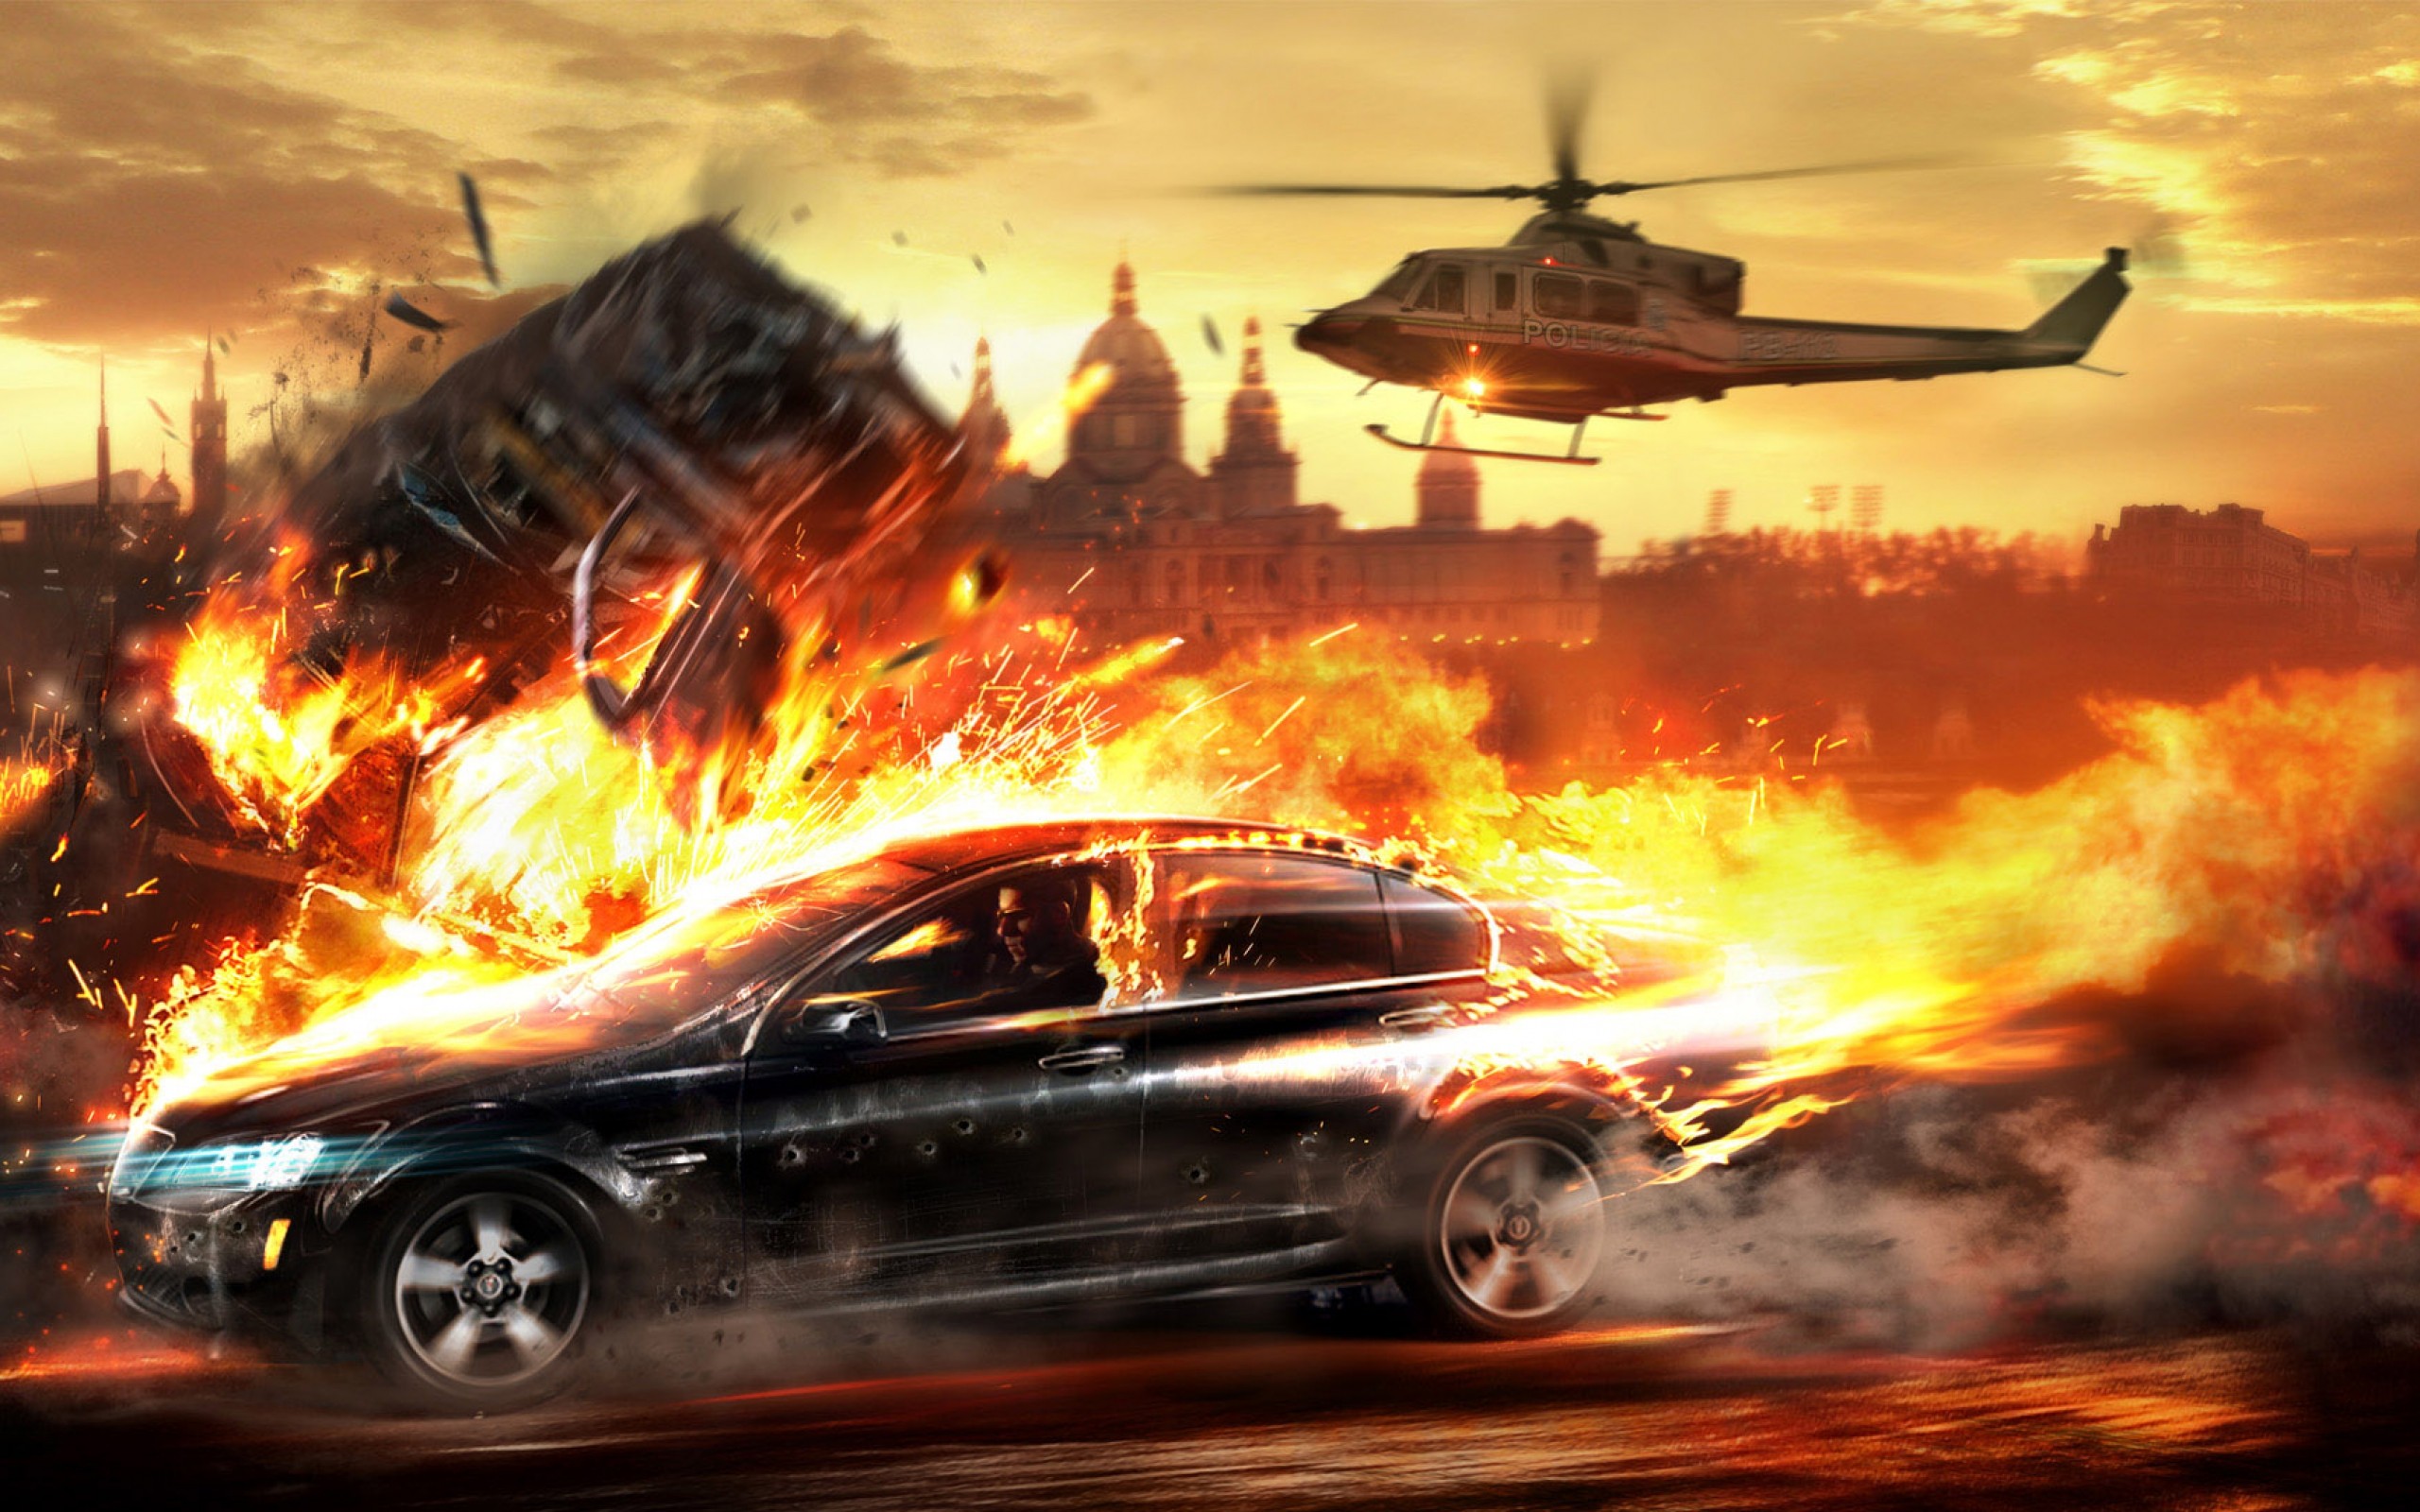 video games, cityscapes, helicopters, cars, explosions, fire, police, destruction - desktop wallpaper